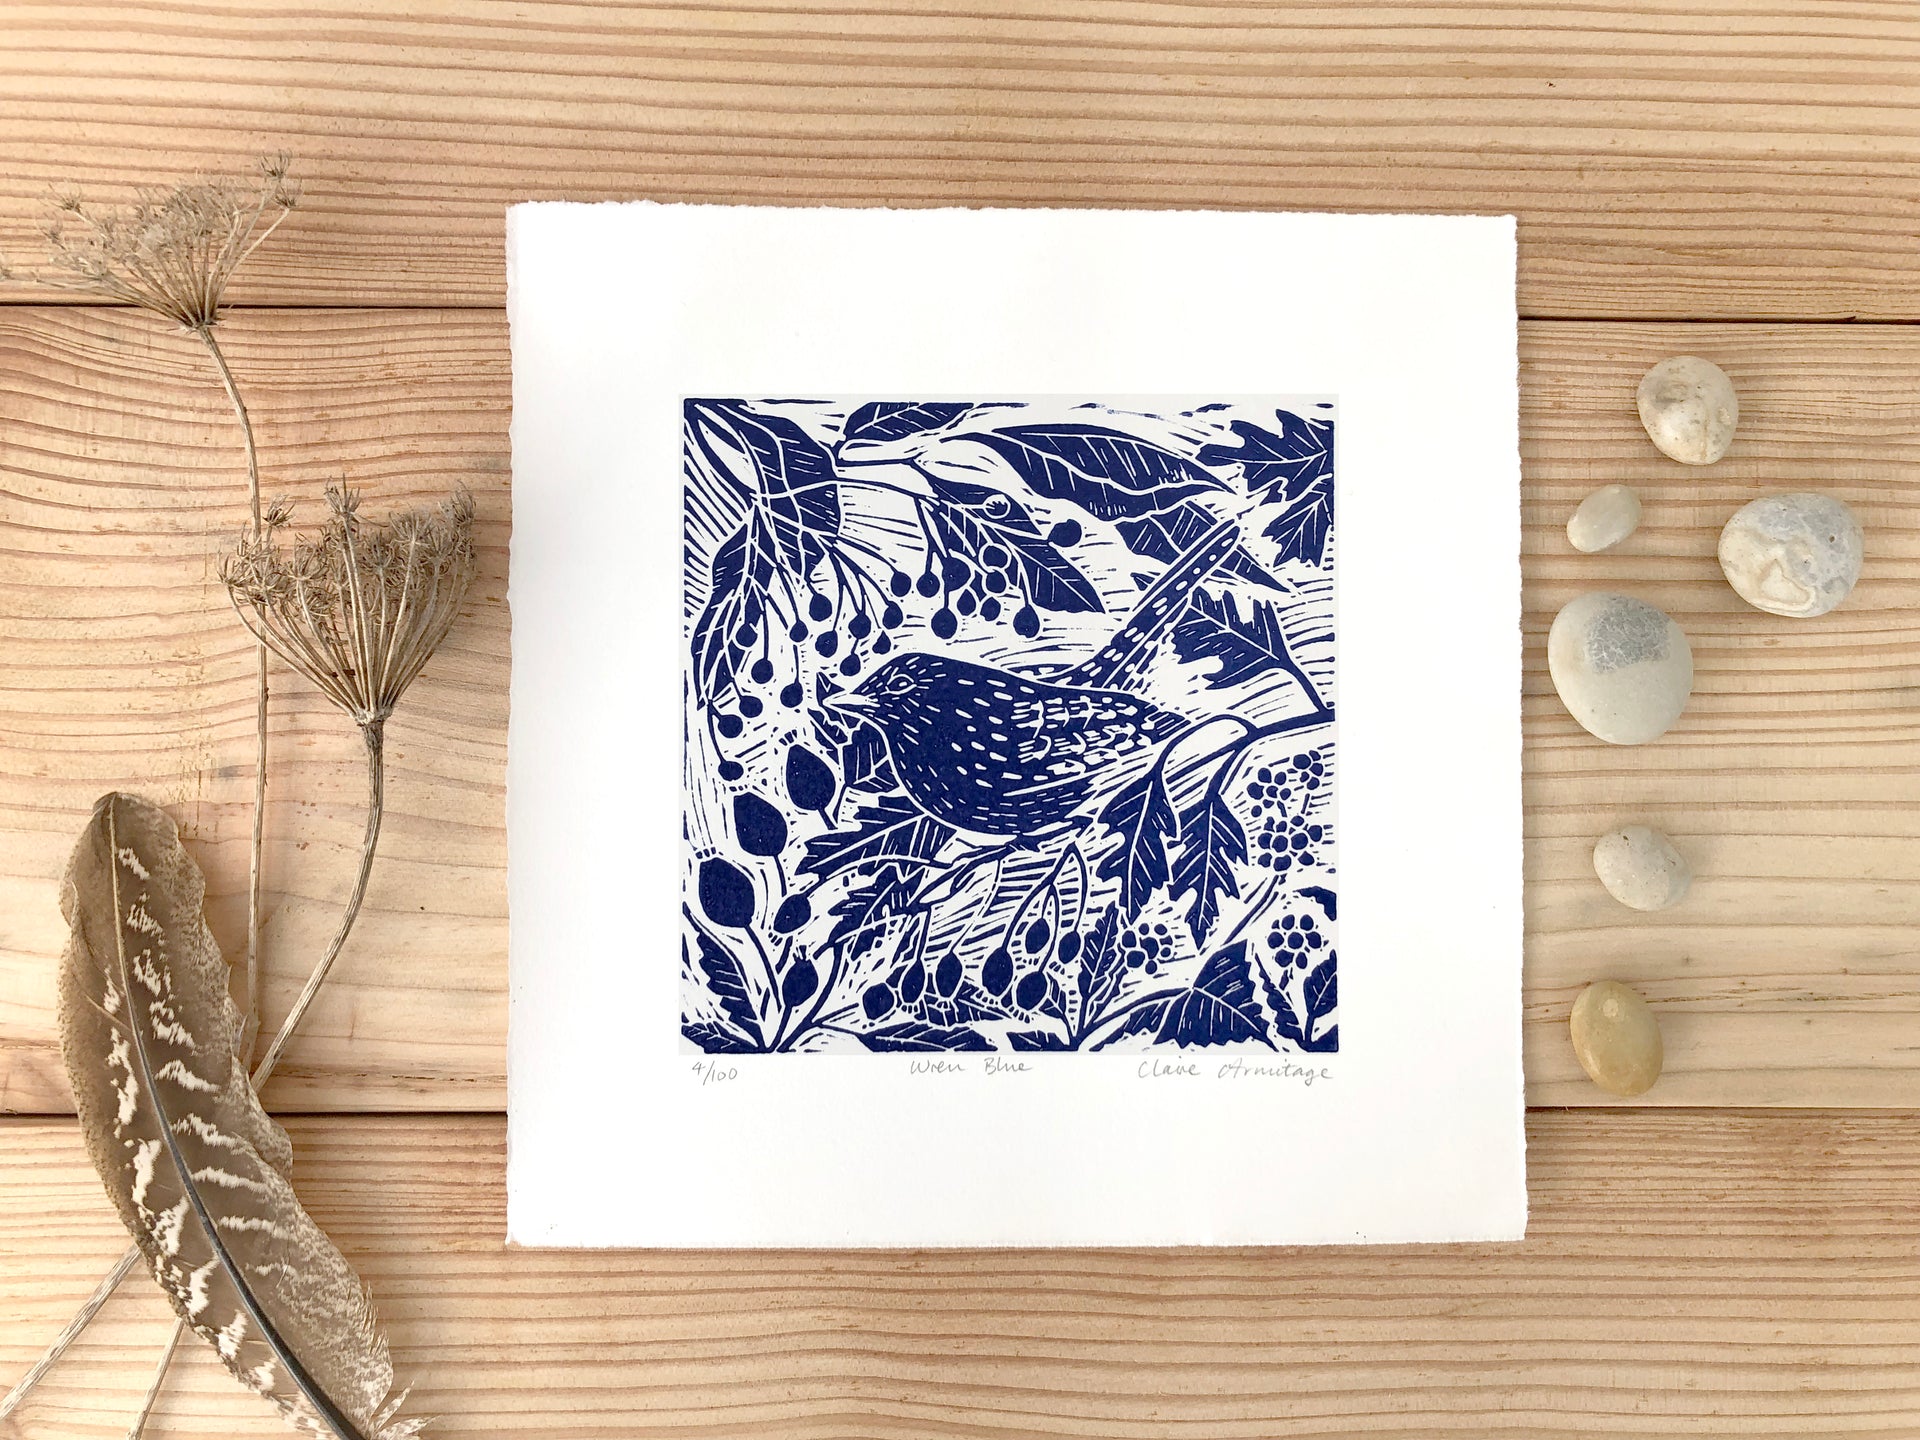 Blue lino print of a Wren and foliage by Cornish artist Claire Armitage.